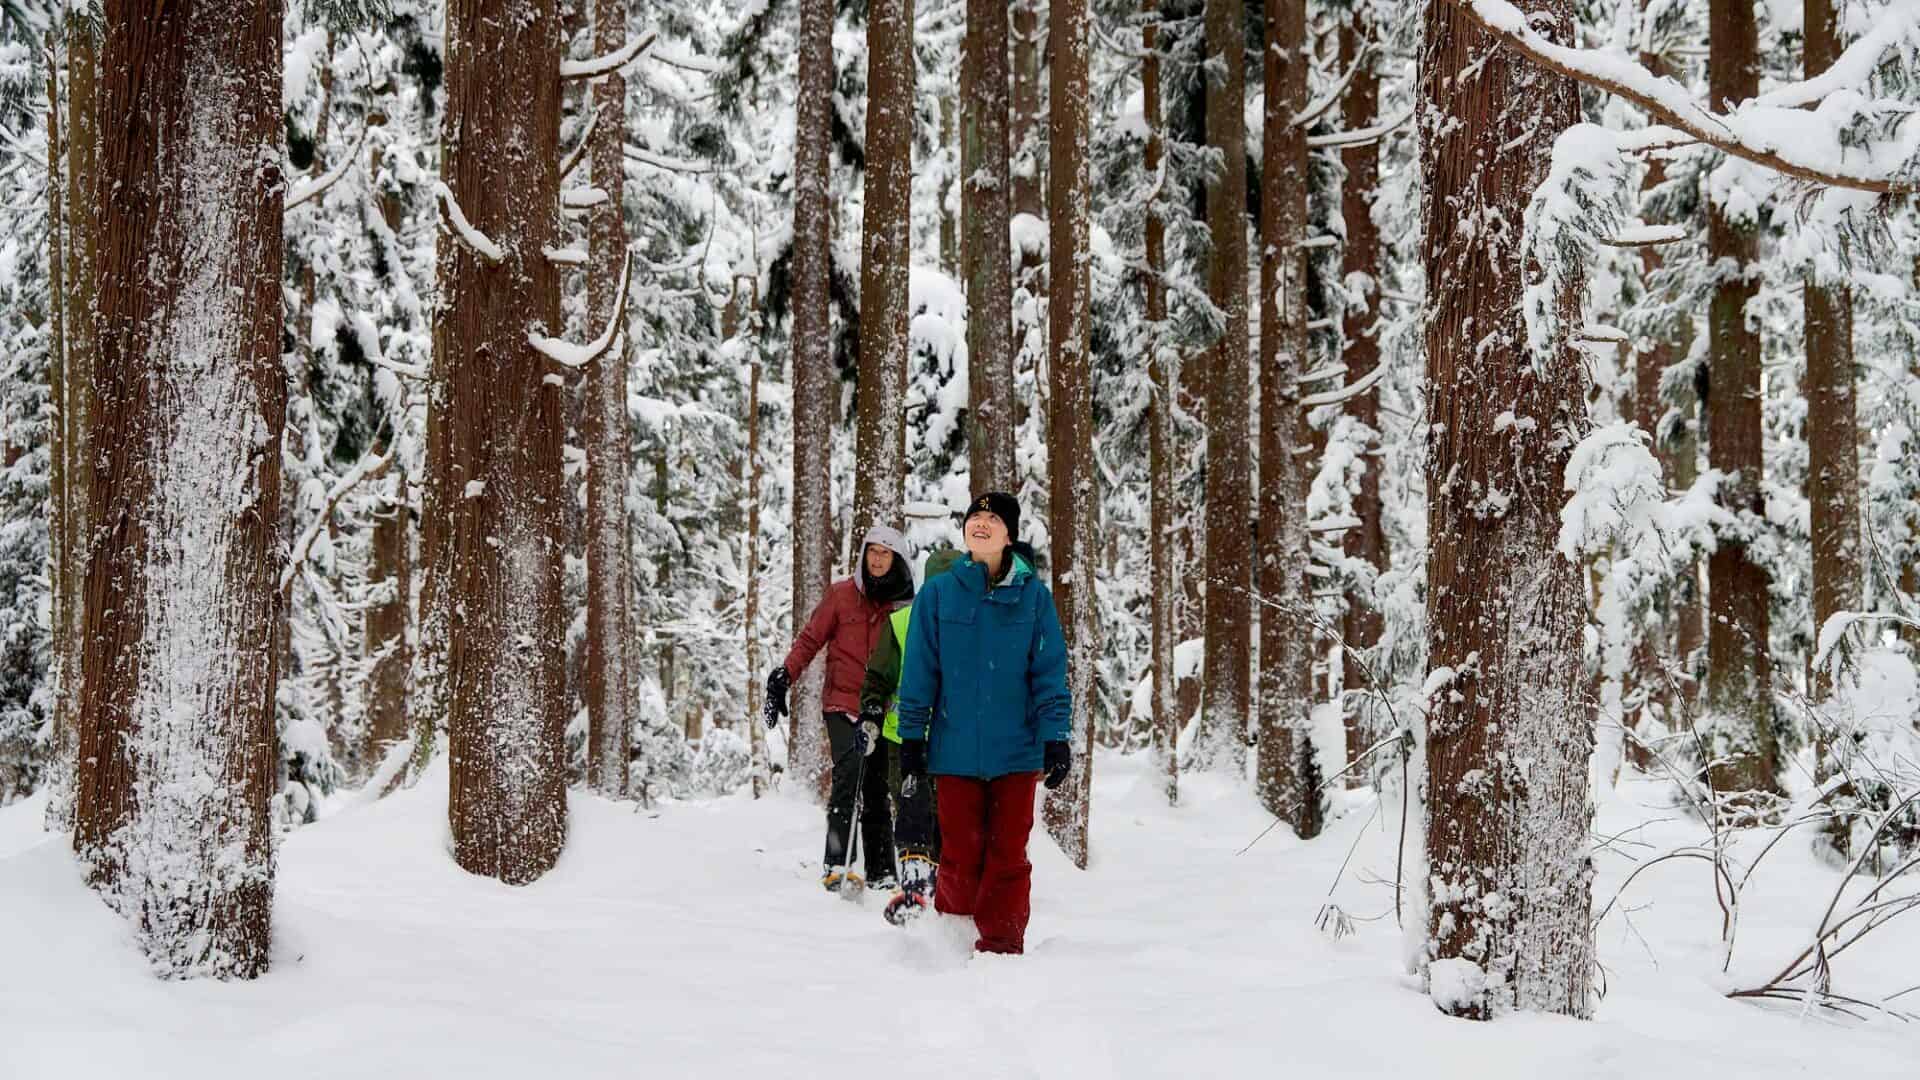 group of people snowshoeing through a serine winter forest